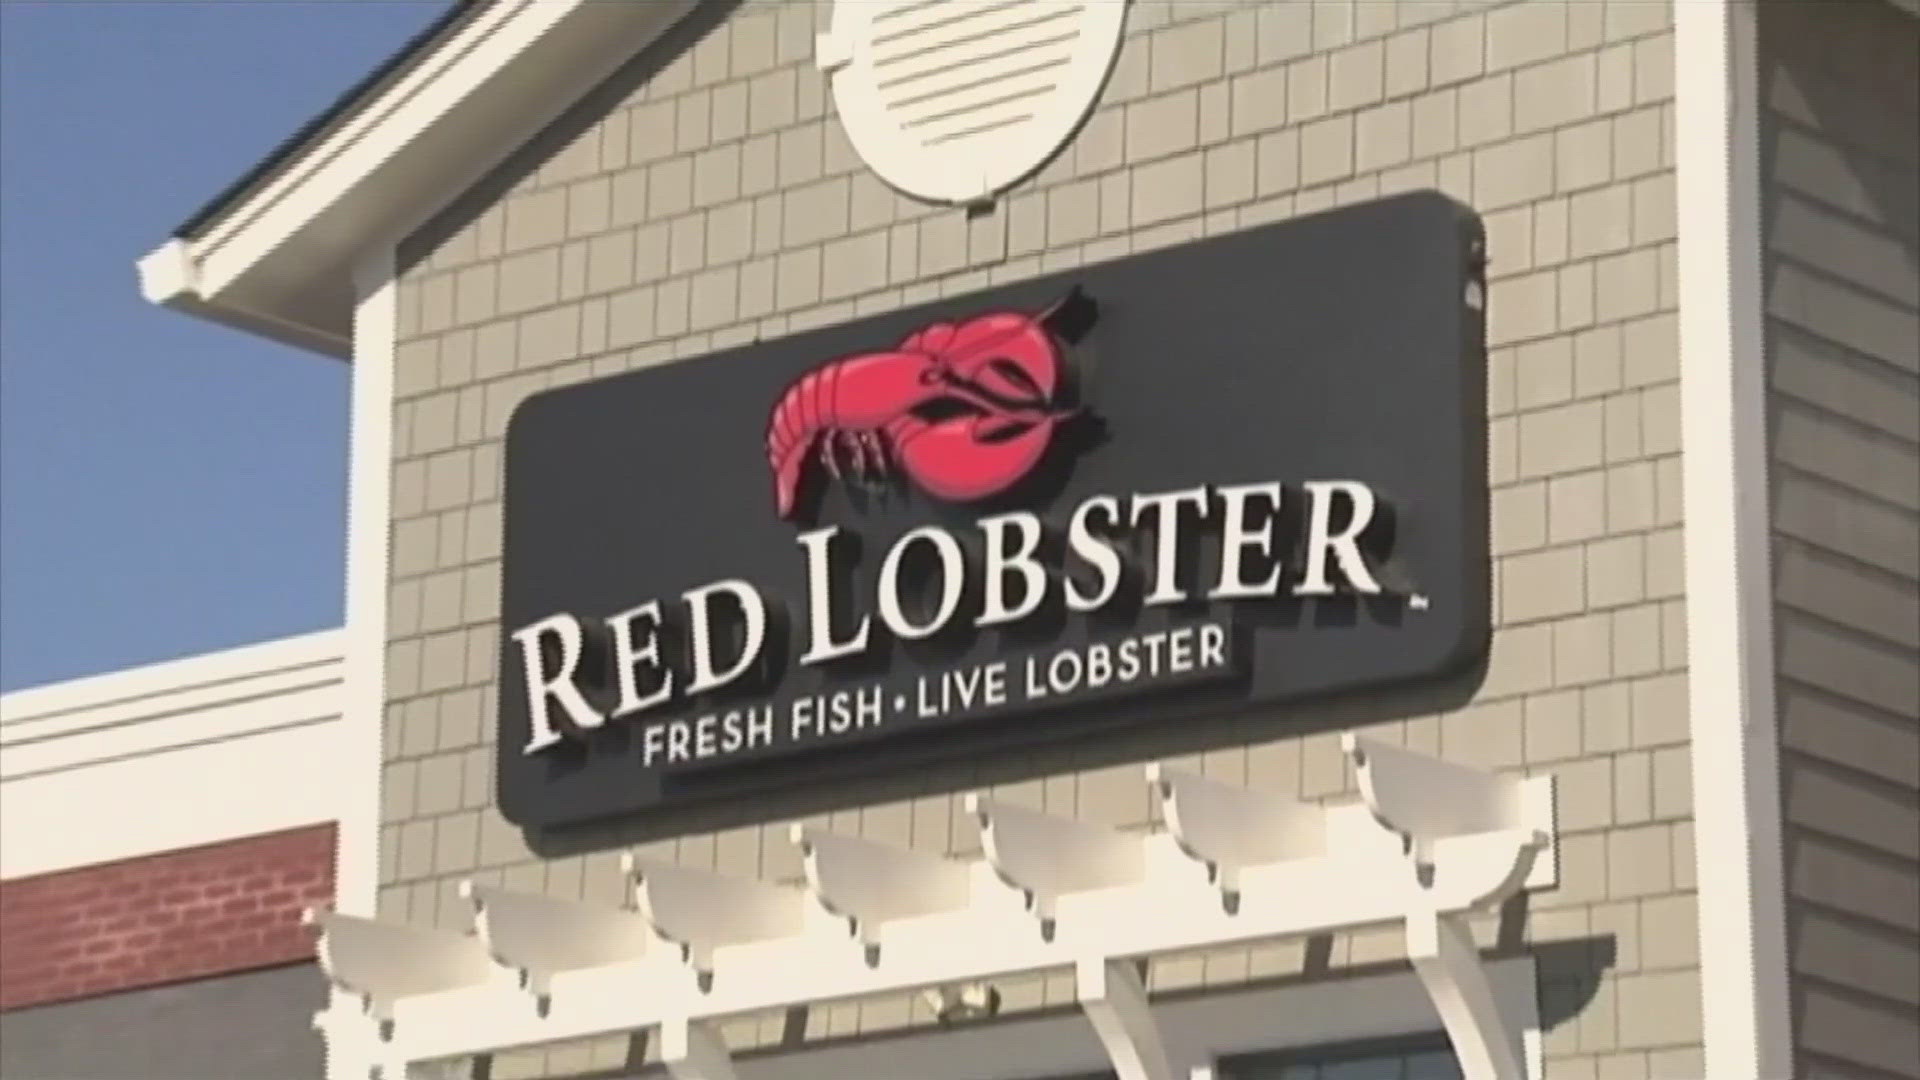 Earlier this month, Red Lobster closed 93 under-performing restaurants including four around the Denver metro area.